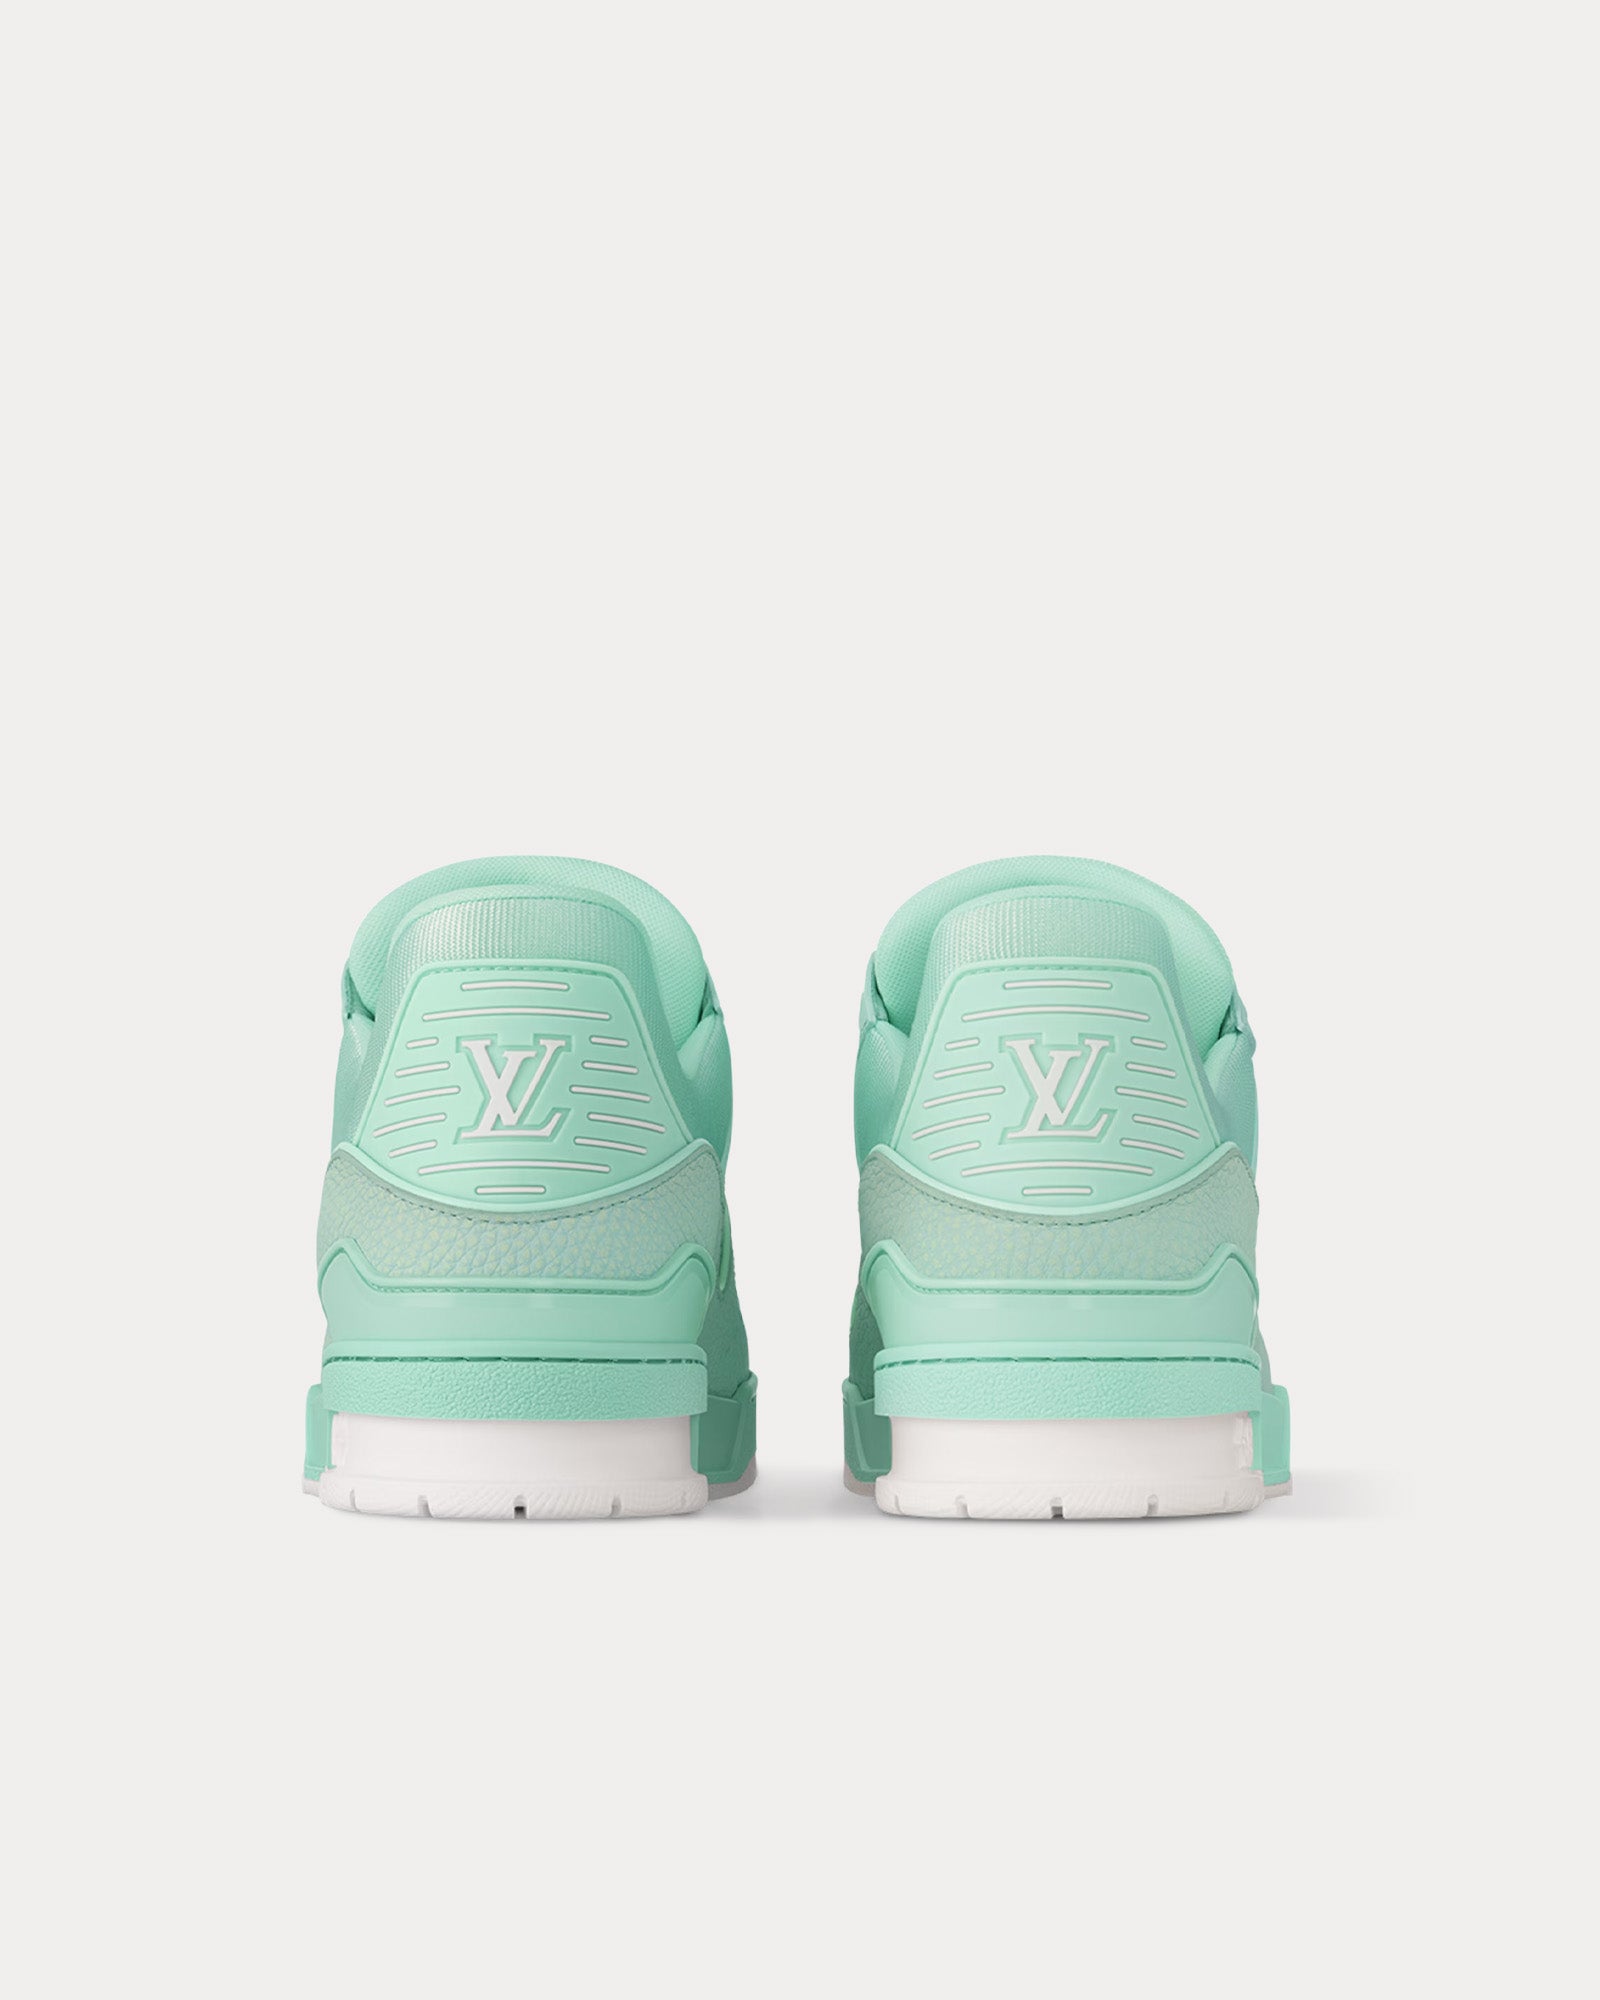 Louis Vuitton - LV Trainer Grained Calf Leather Pastel Green Low Top Sneakers